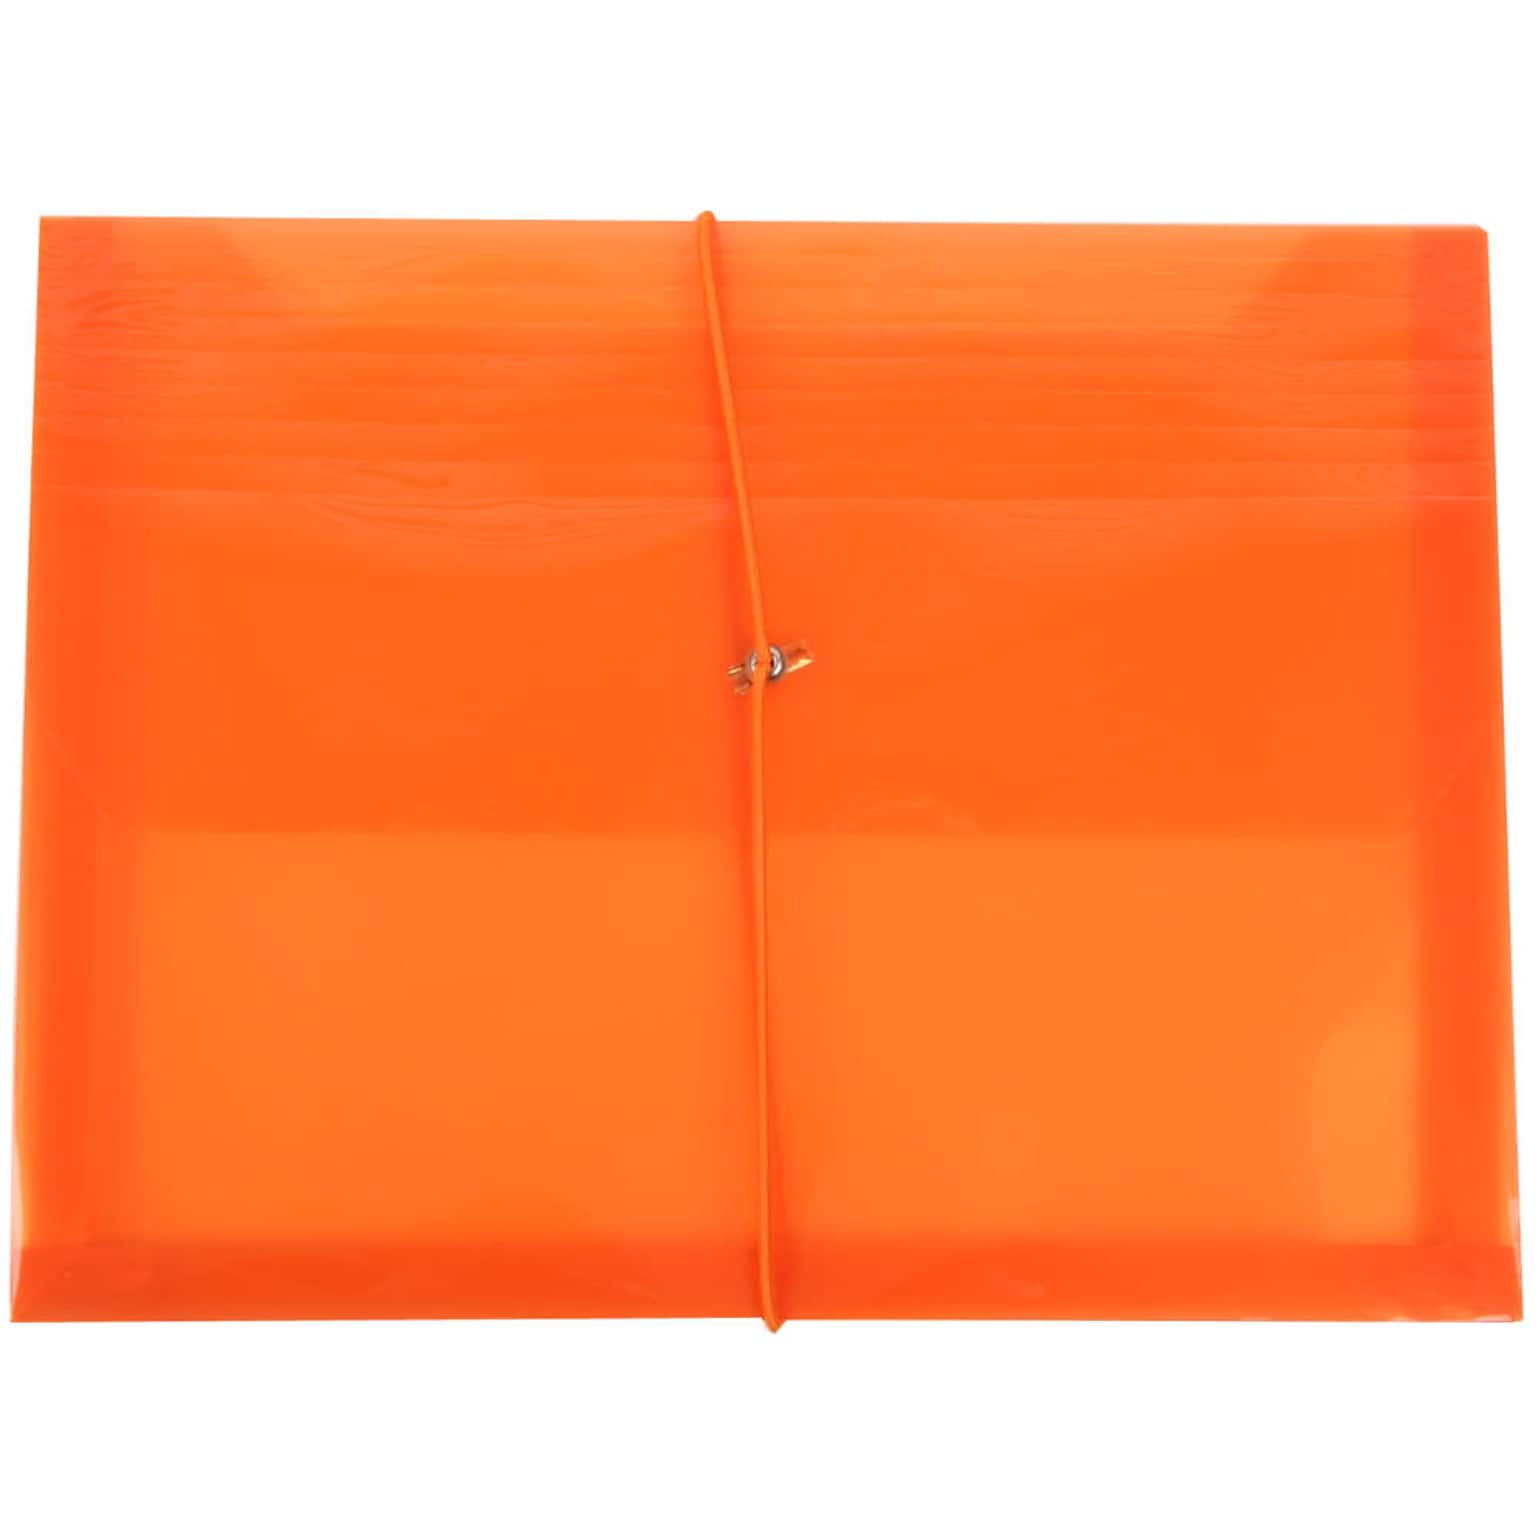 JAM Paper® Plastic Envelopes with Elastic Band Closure, 9.75 x 13 with 2.625 Inch Expansion, Orange, 12/Pack (218E25ORB)